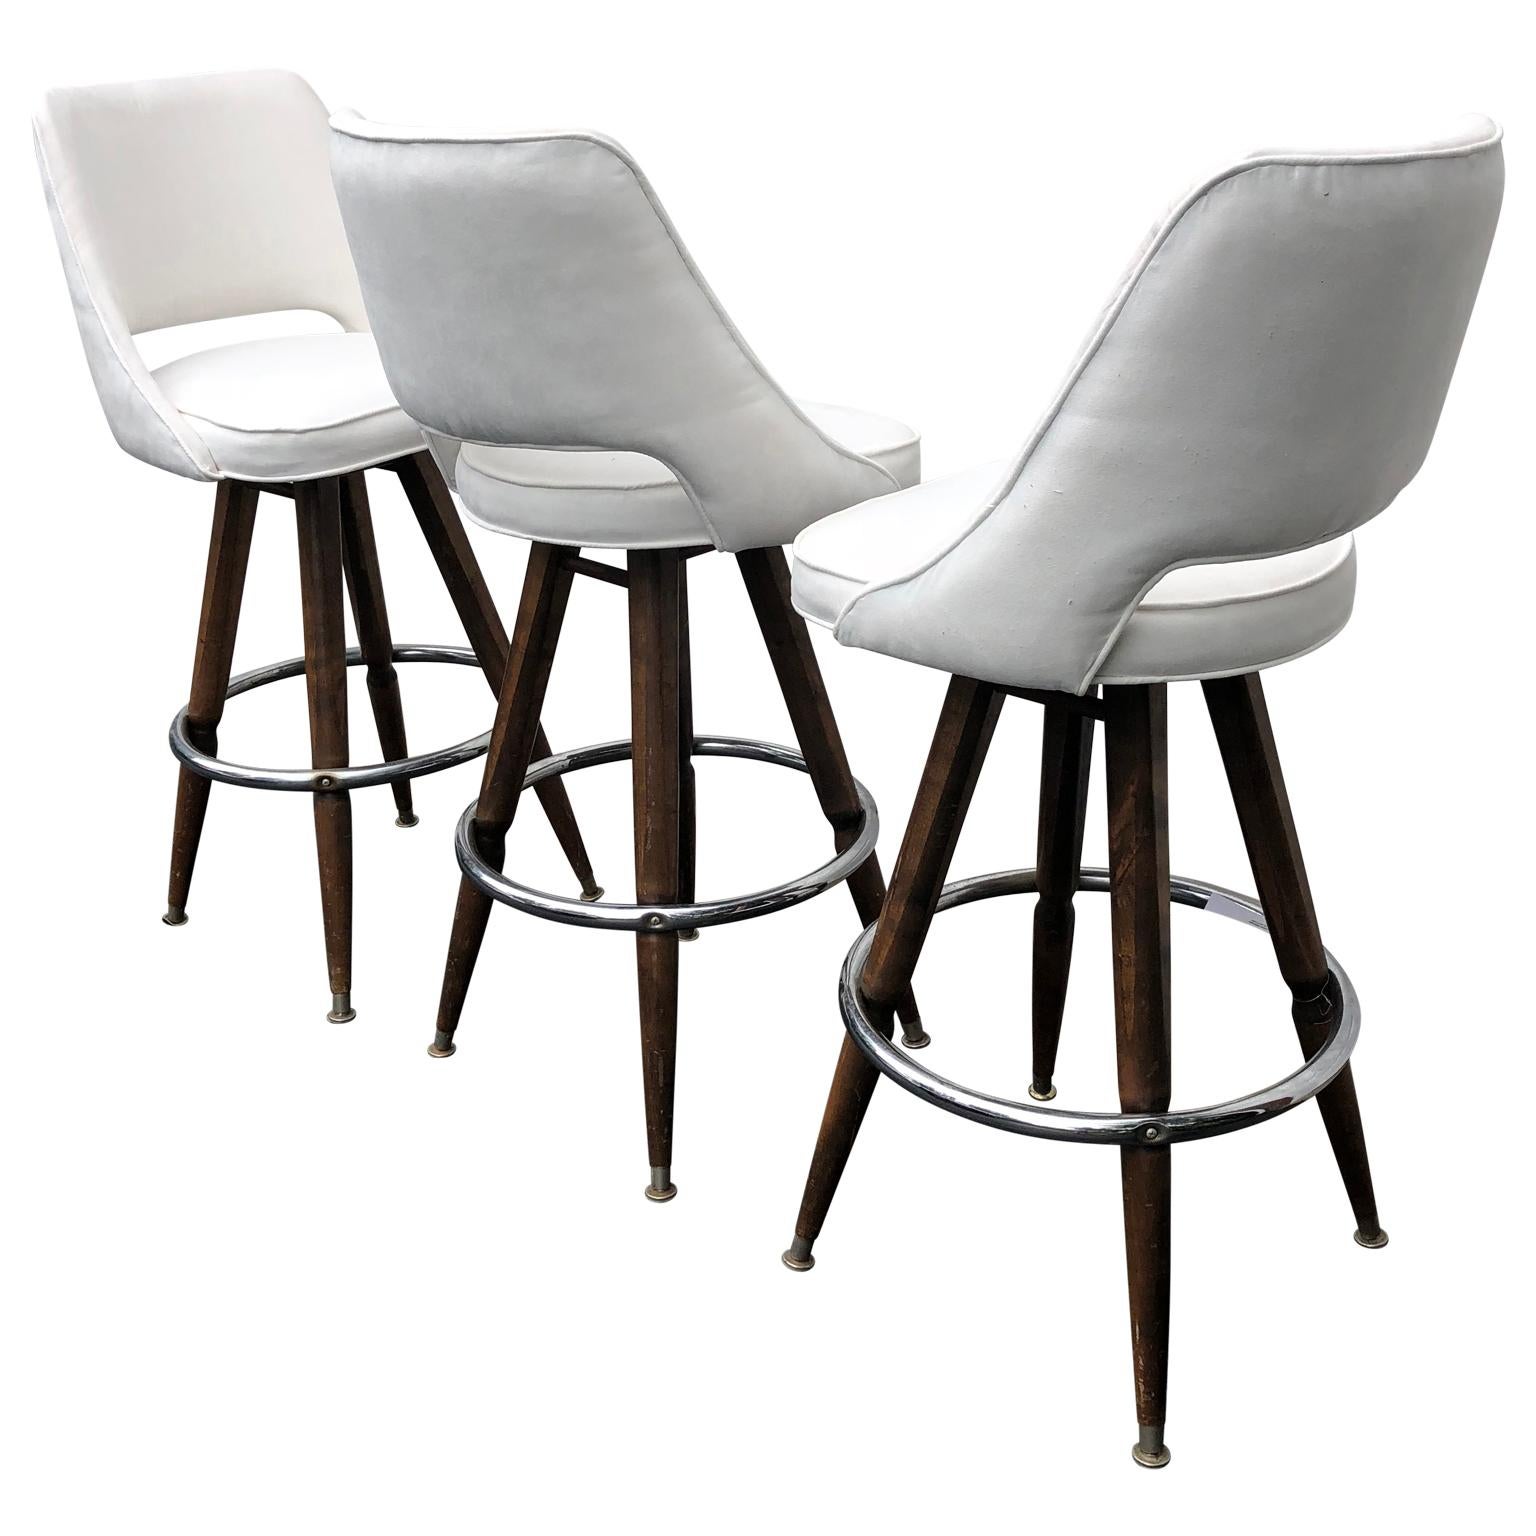 Set of Three Mid-Century White Faux-Suede Bar Stools In Good Condition For Sale In Haddonfield, NJ